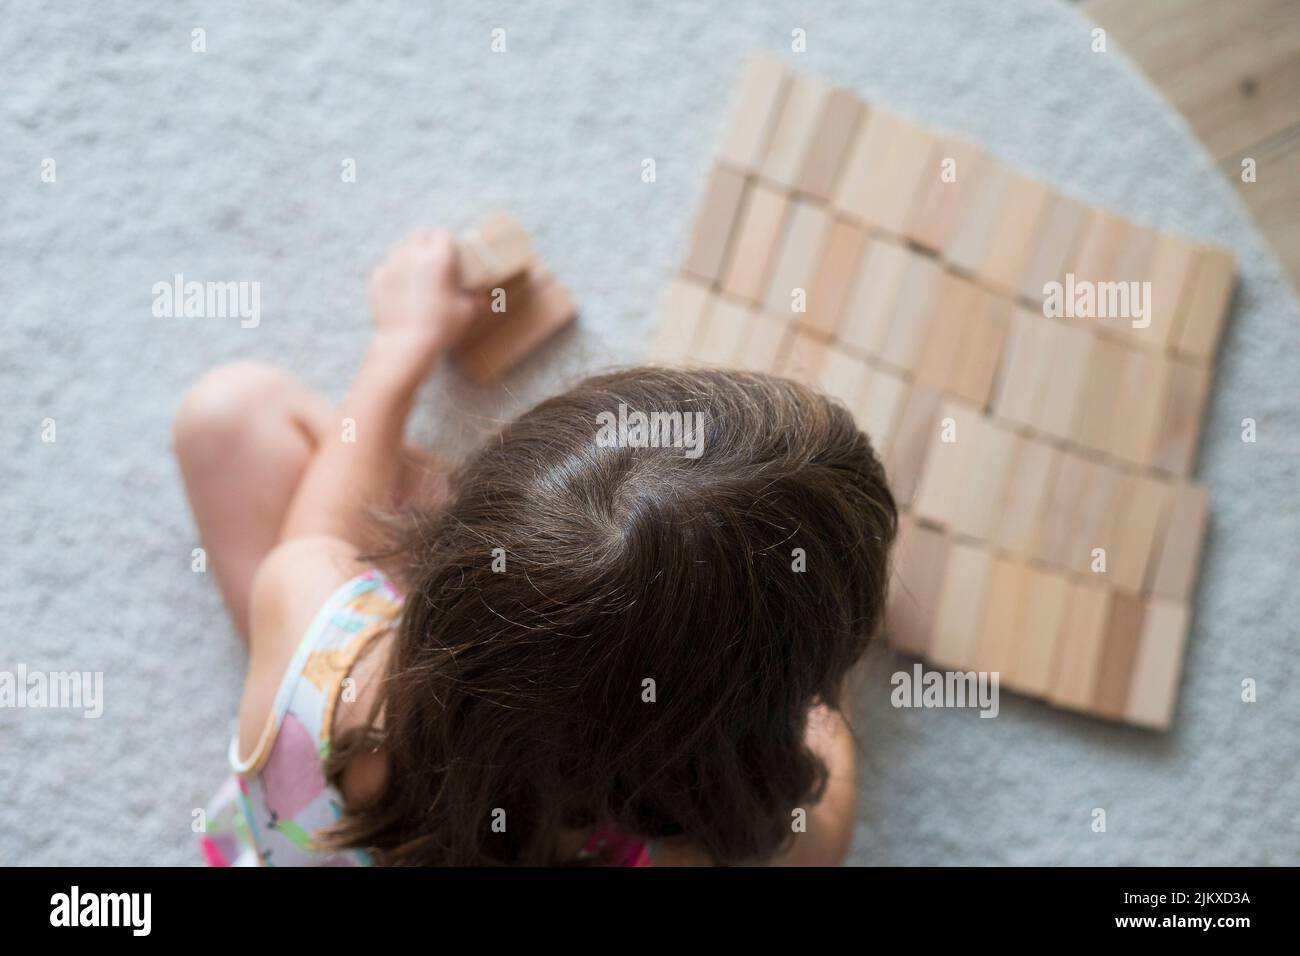 Caucasian child girl, 5 yers old, playing with wooden blocks on the floor, sitting on beige carpet indoor. Stock Photo